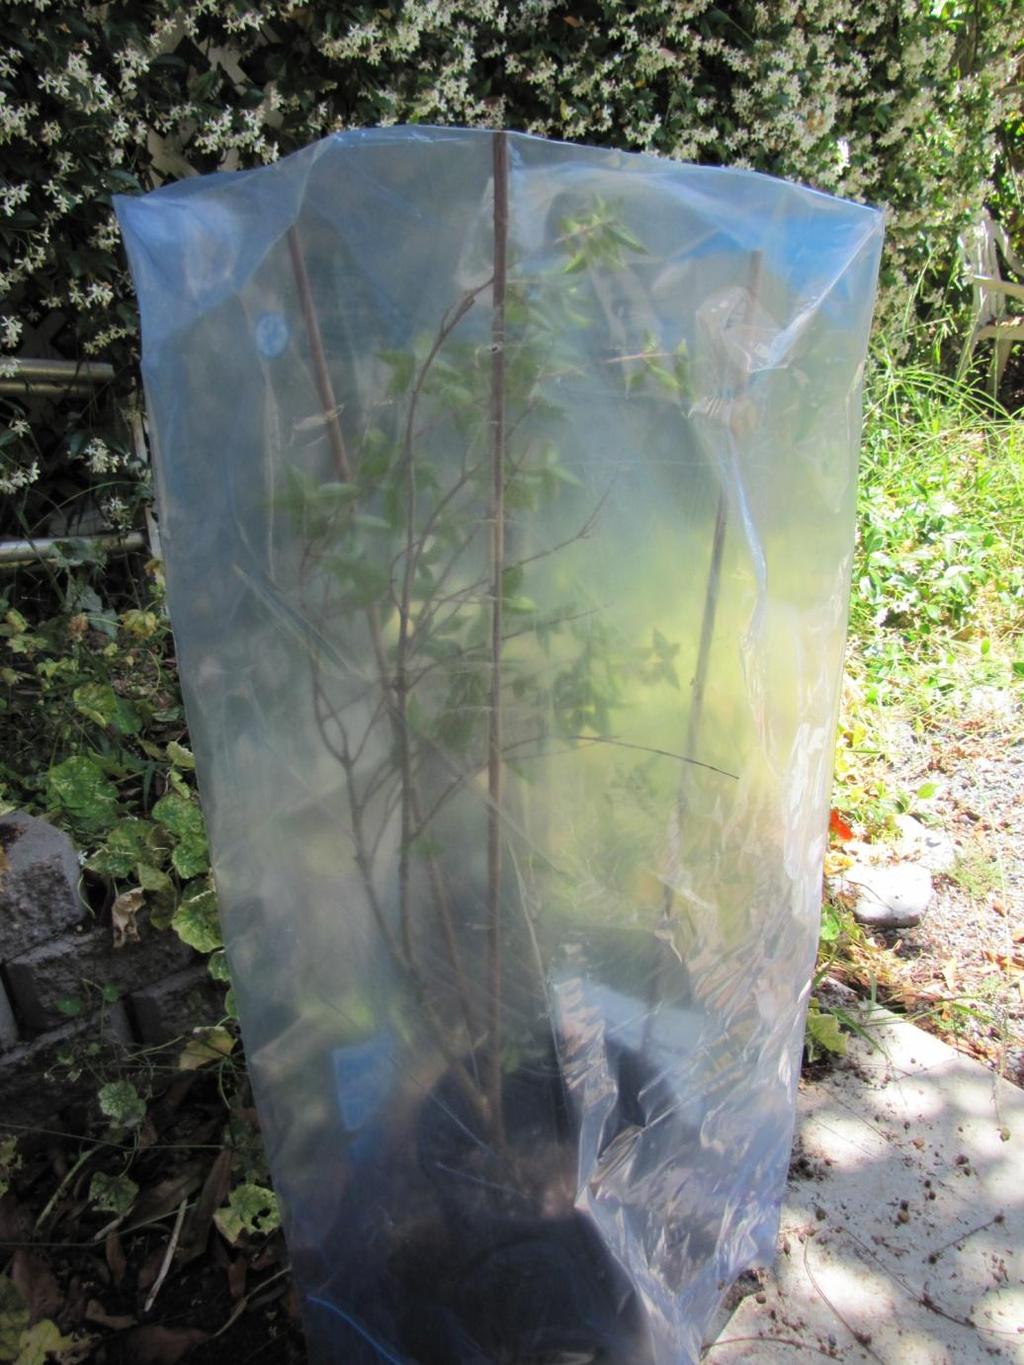 Ways to Reduce Transpiration Bagging the air-layer in a translucent plastic bag can act like an individual high humidity greenhouse for each air-layer.